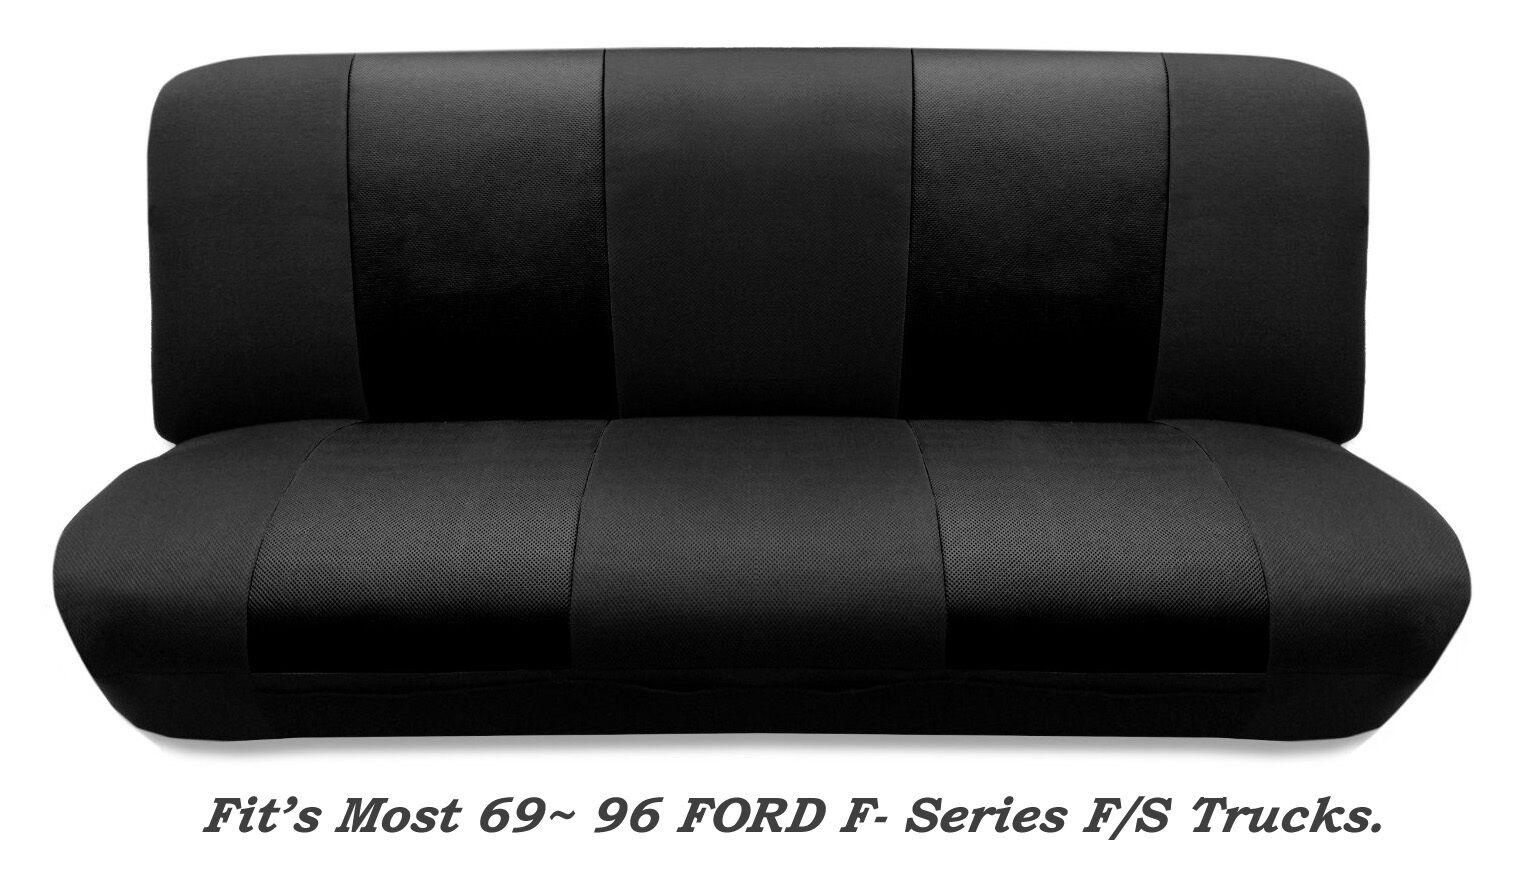 Mesh Black Full Size Bench Seat Cover Fits Most 69-96 Ford F- Series F/STrucks.